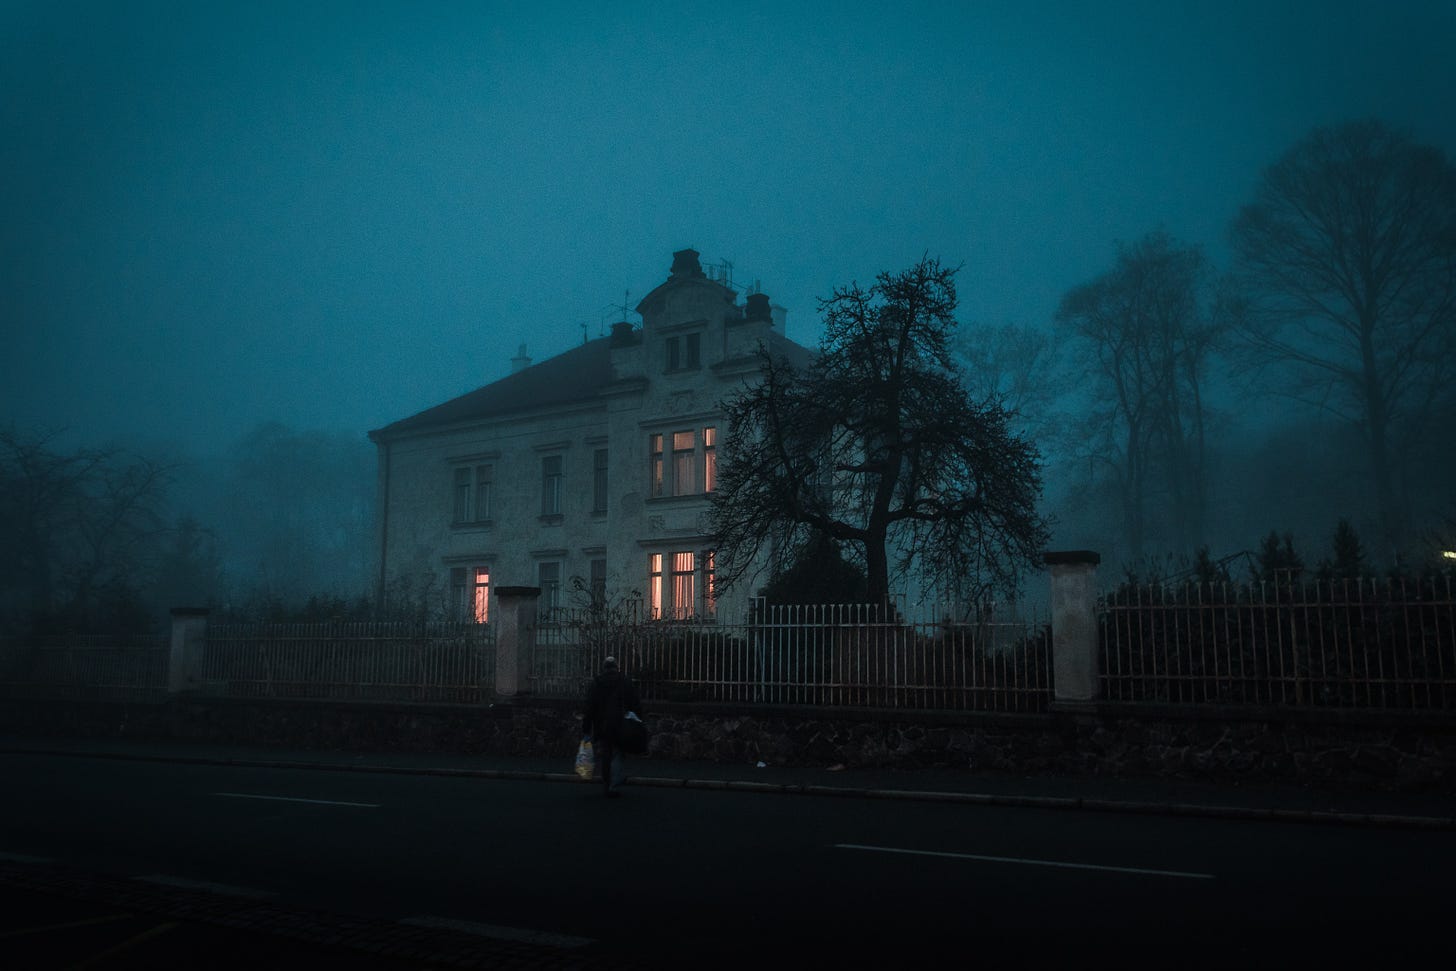 Photo credit: Ján Jakub Naništa. A large house in semi-darkness, surrounded by mist-shrouded trees. Lights are on in several windows. Beyond the metal railings outside, a solitary figure watches.